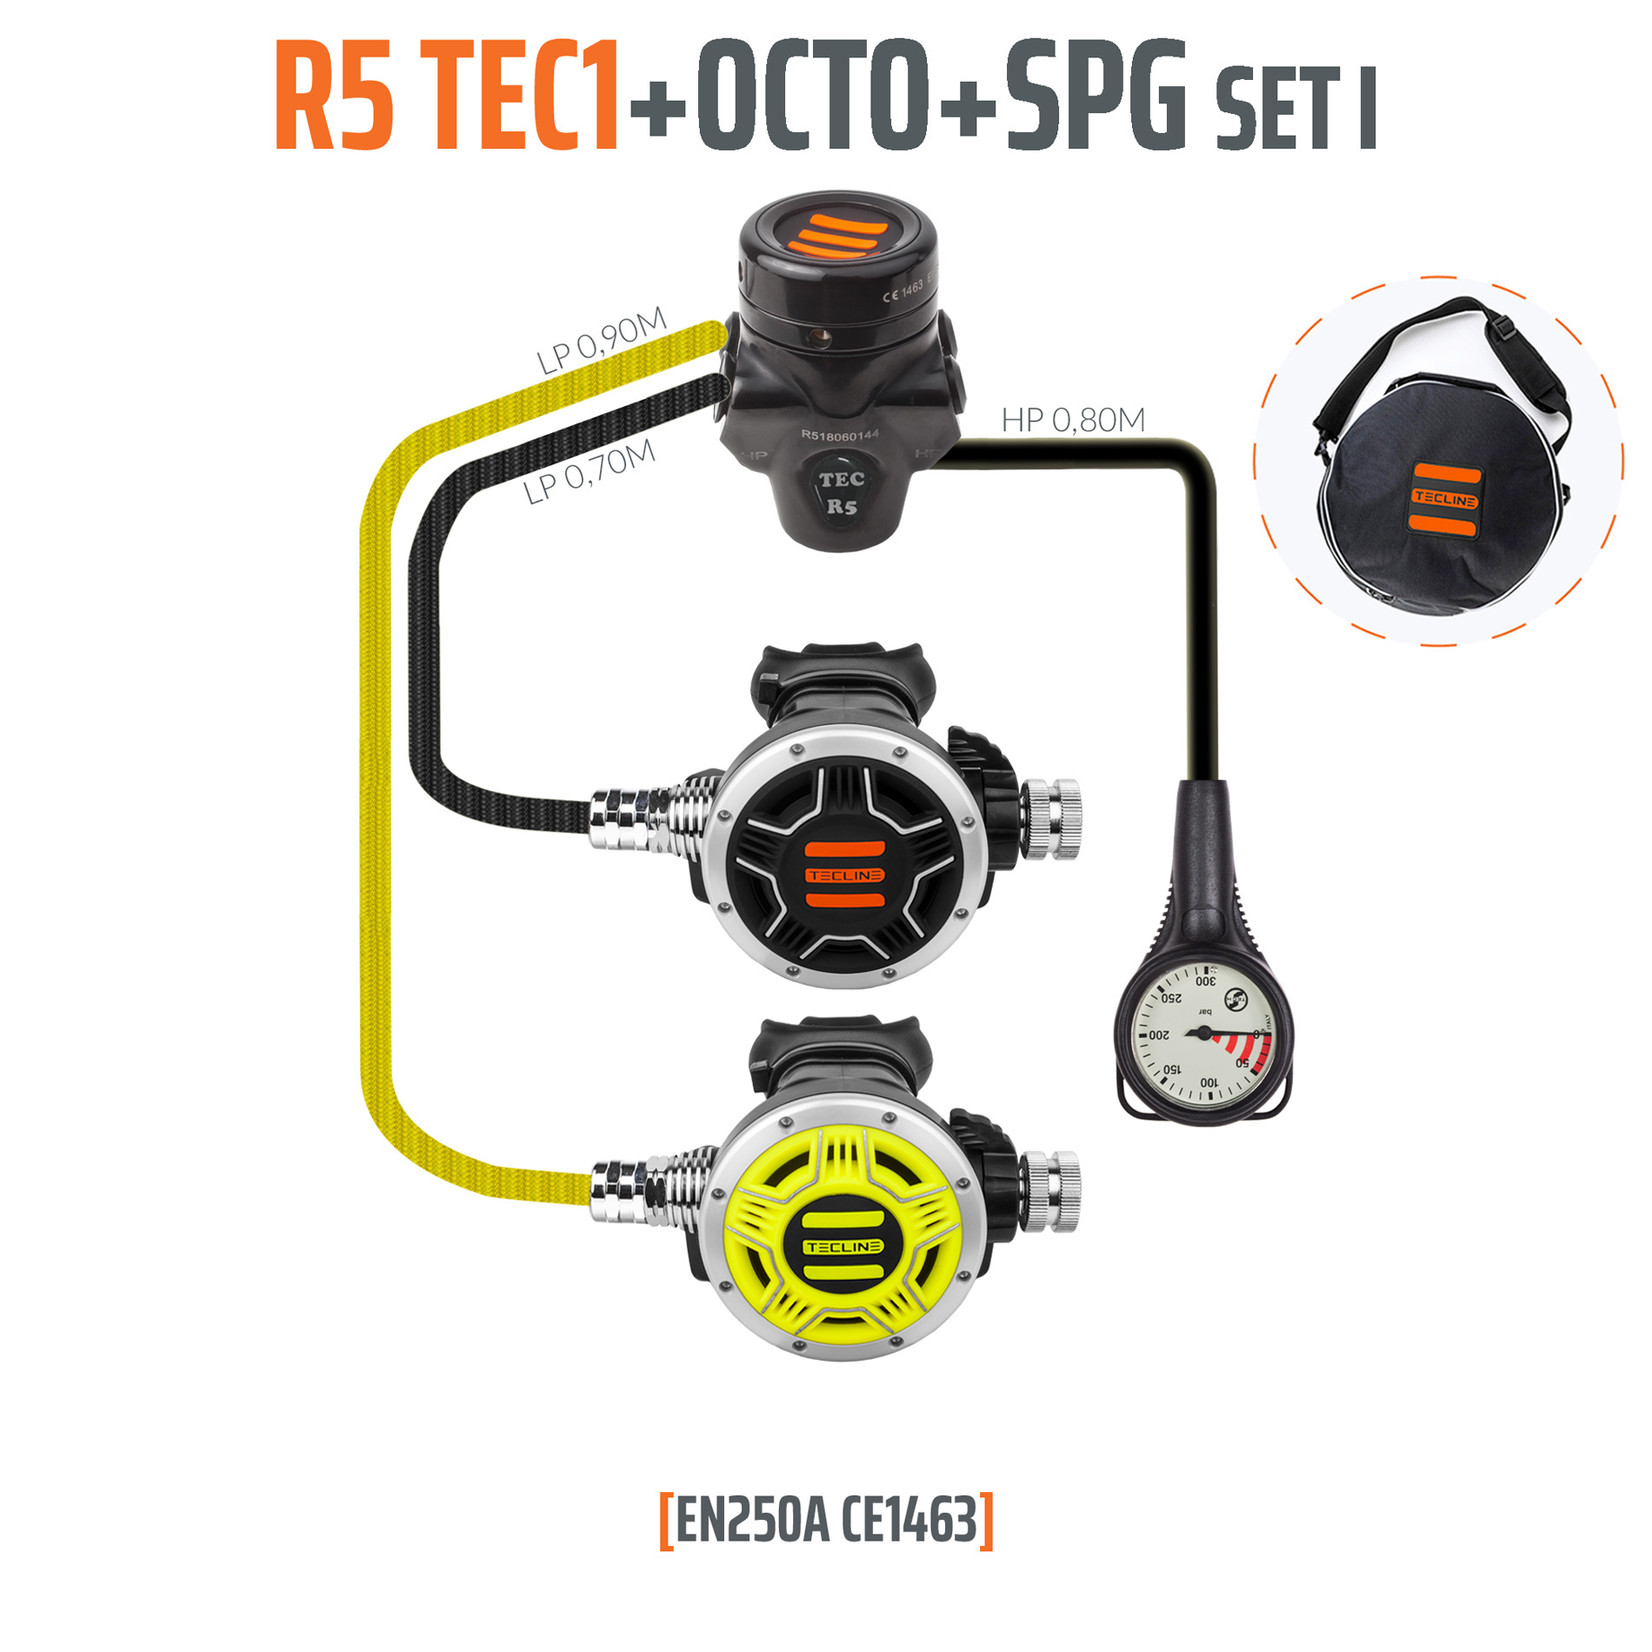 Tecline Regulator R5 TEC1 set I with octo and SPG - EN250A